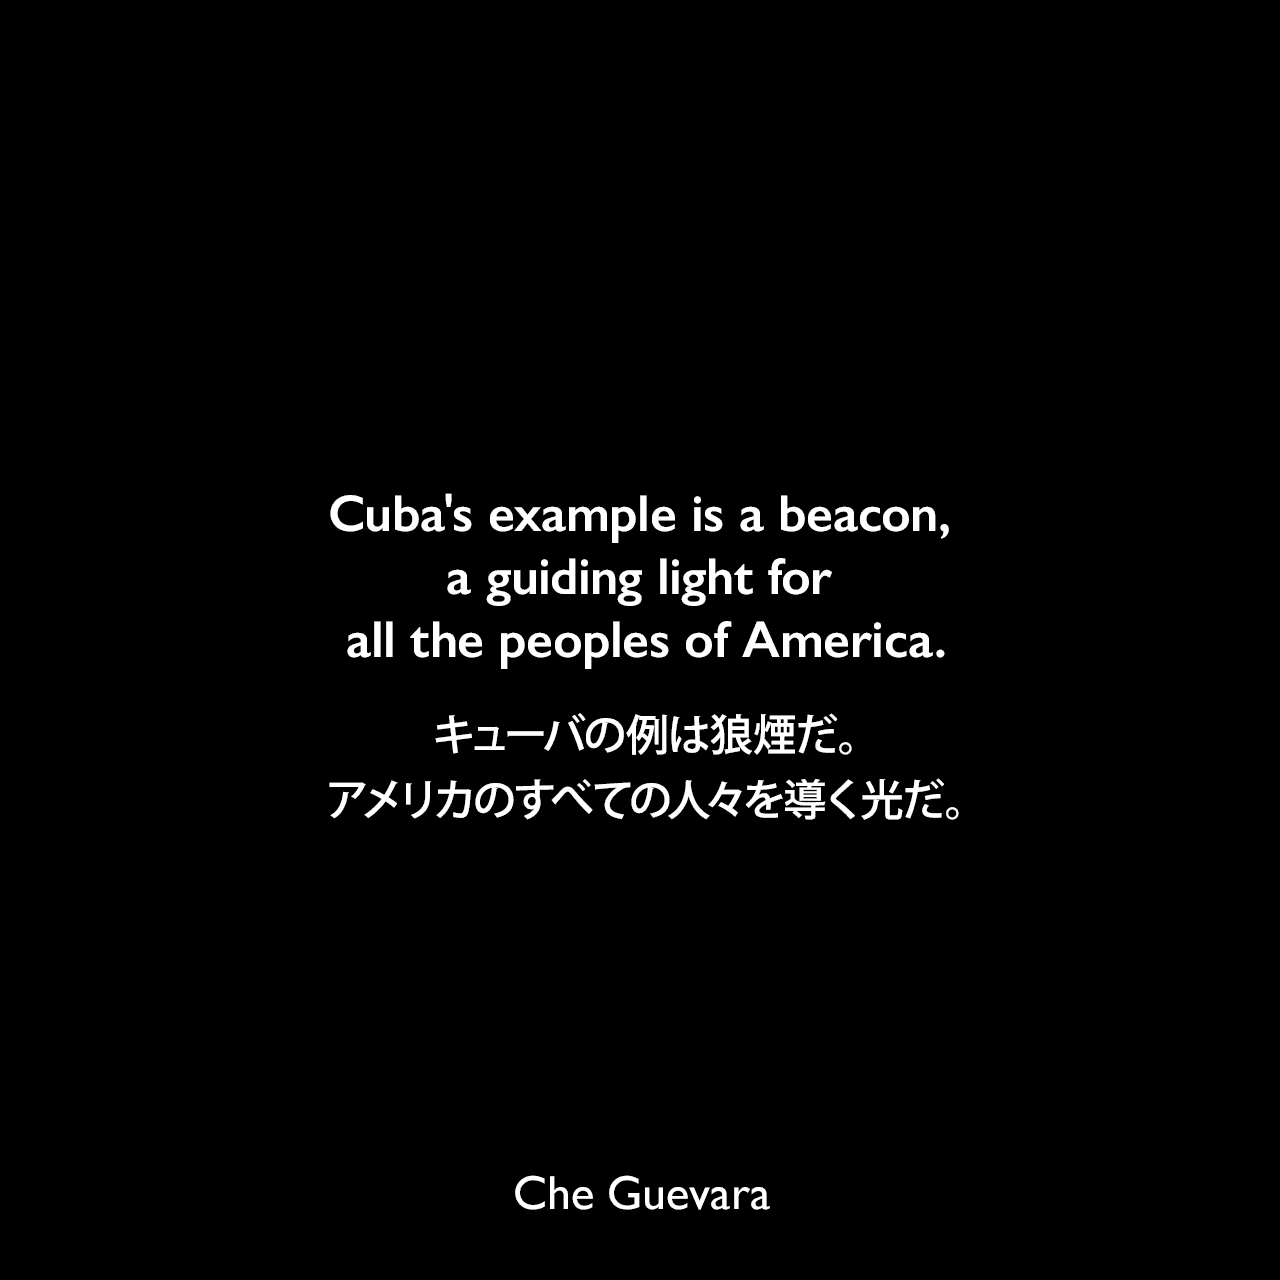 Cuba's example is a beacon, a guiding light for all the peoples of America.キューバの例は狼煙だ。アメリカのすべての人々を導く光だ。- チェ・ゲバラによるエッセイ「Tactics and Strategy of the Latin American Revolution」よりChe Guevara